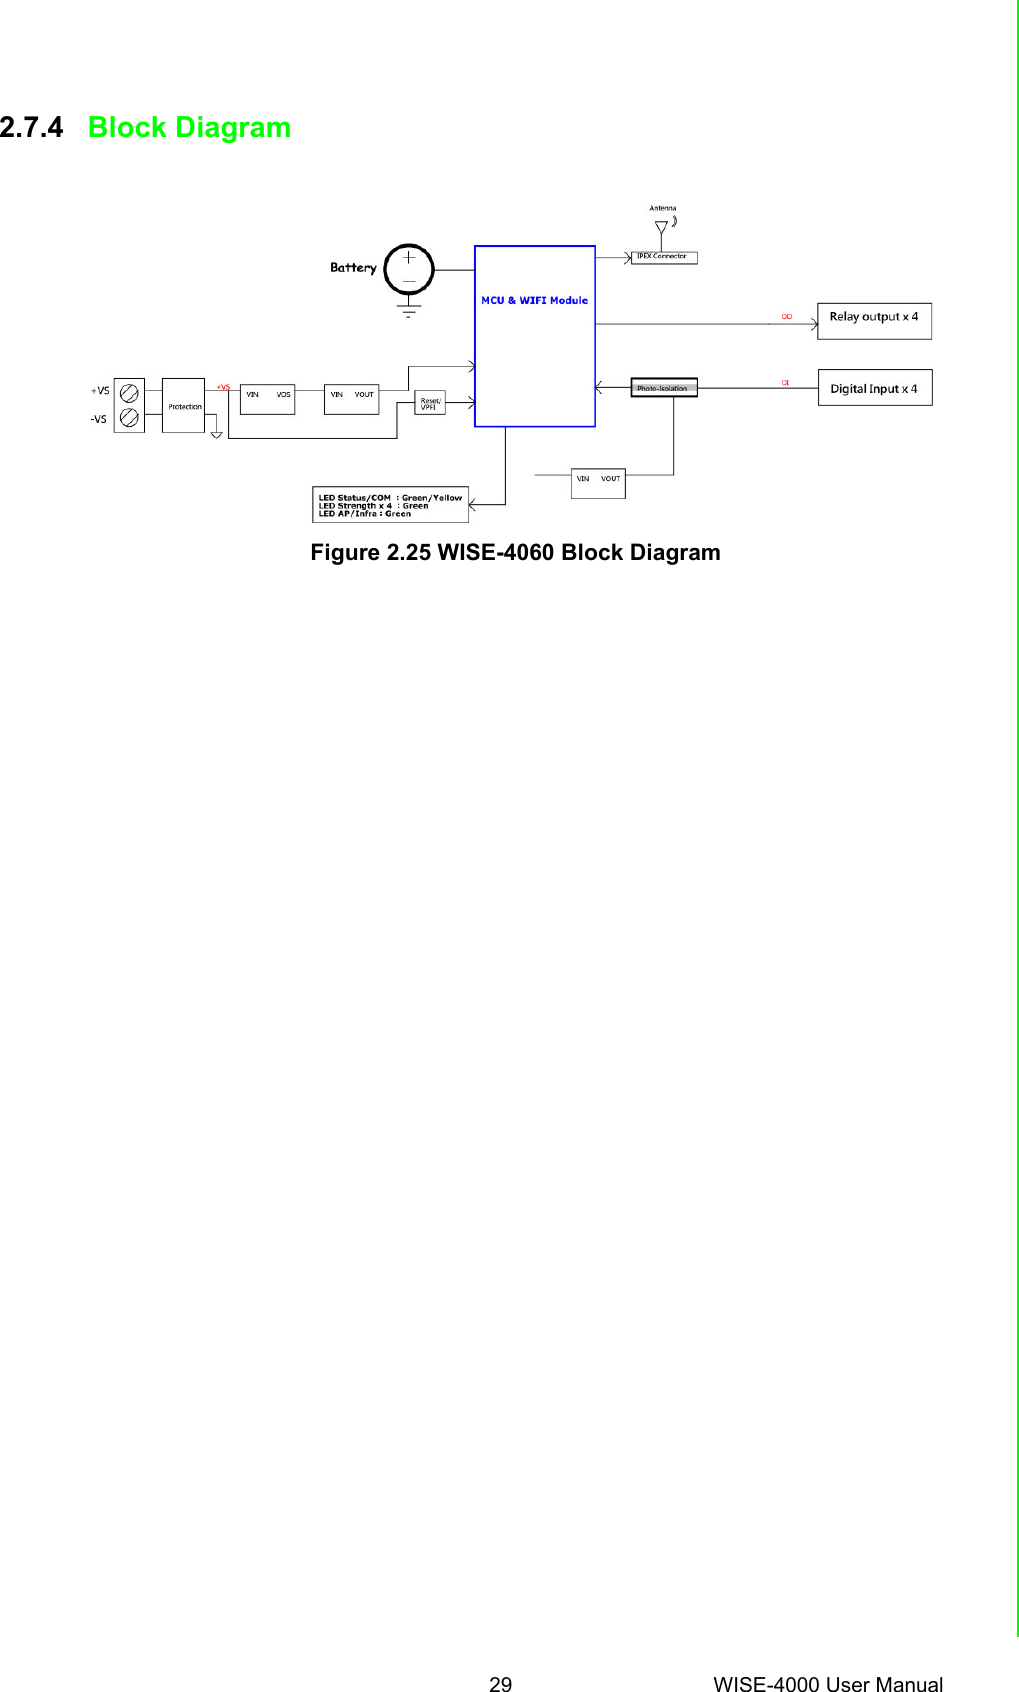 29 WISE-4000 User ManualChapter 2 Product Specifications2.7.4 Block DiagramFigure 2.25 WISE-4060 Block Diagram